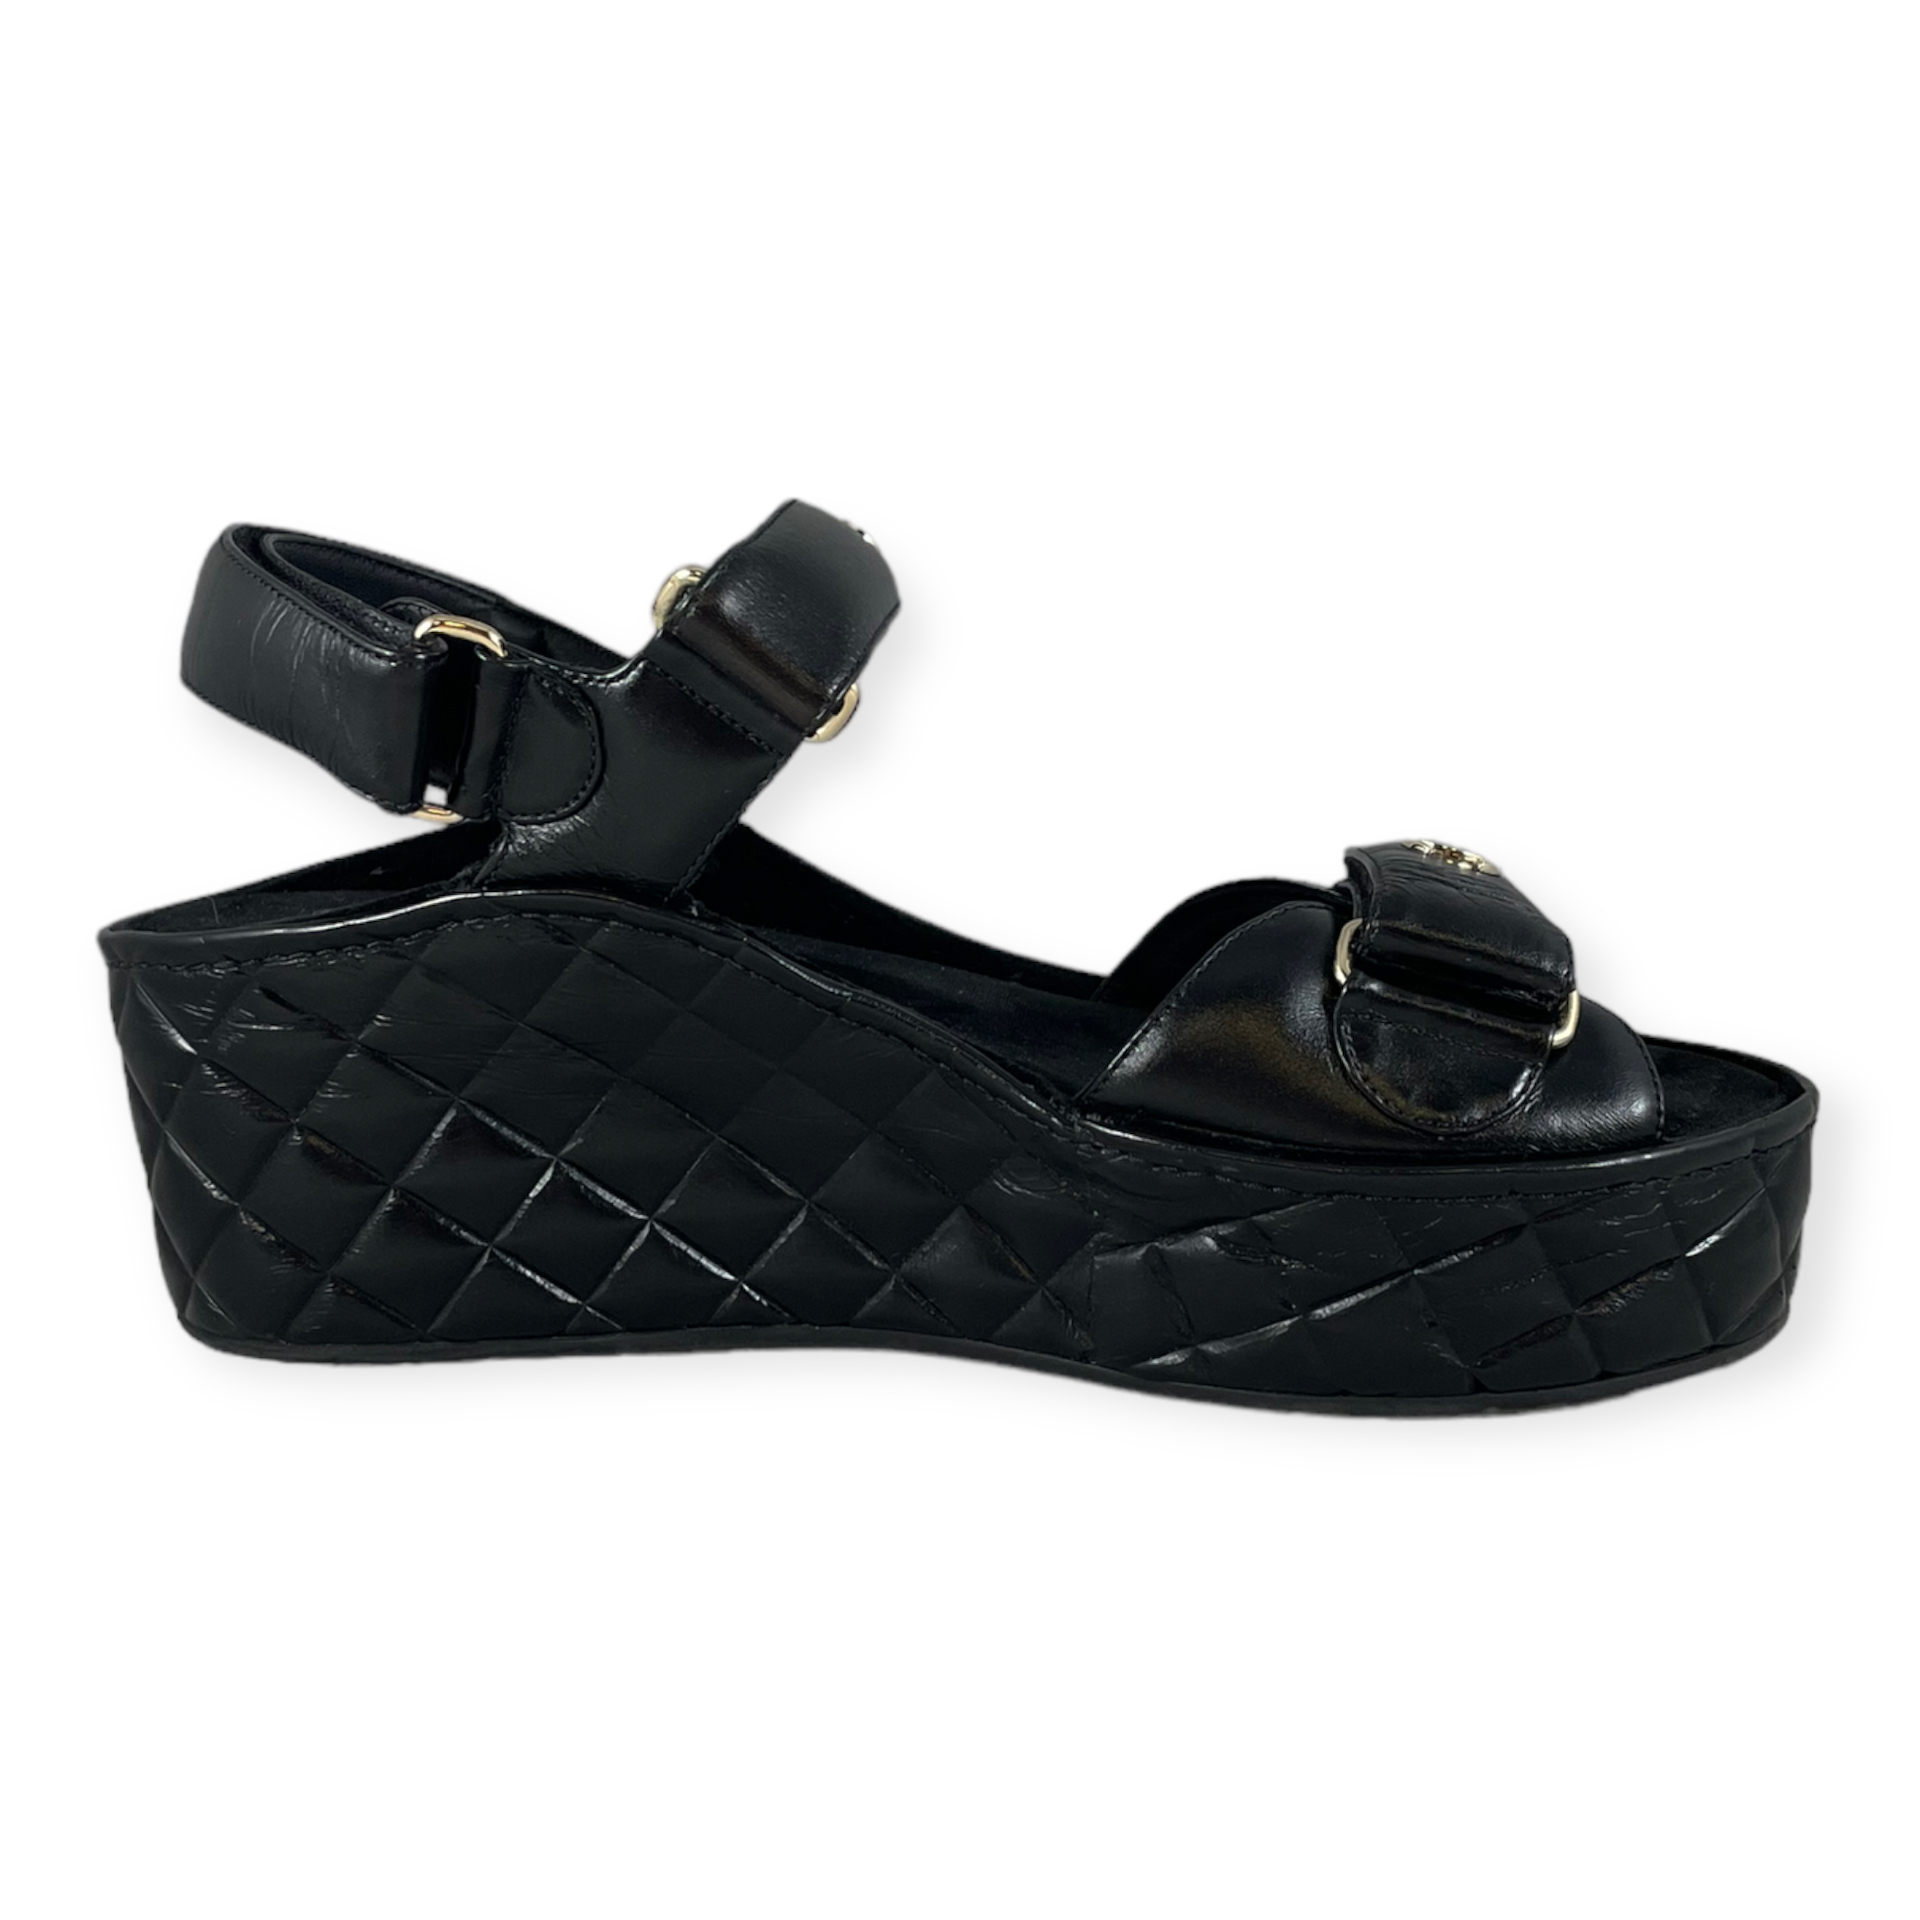 Chanel quilted Lambskin Mules sandals , RARE, new in the box $1325 siz –  Lemon Tree Goods